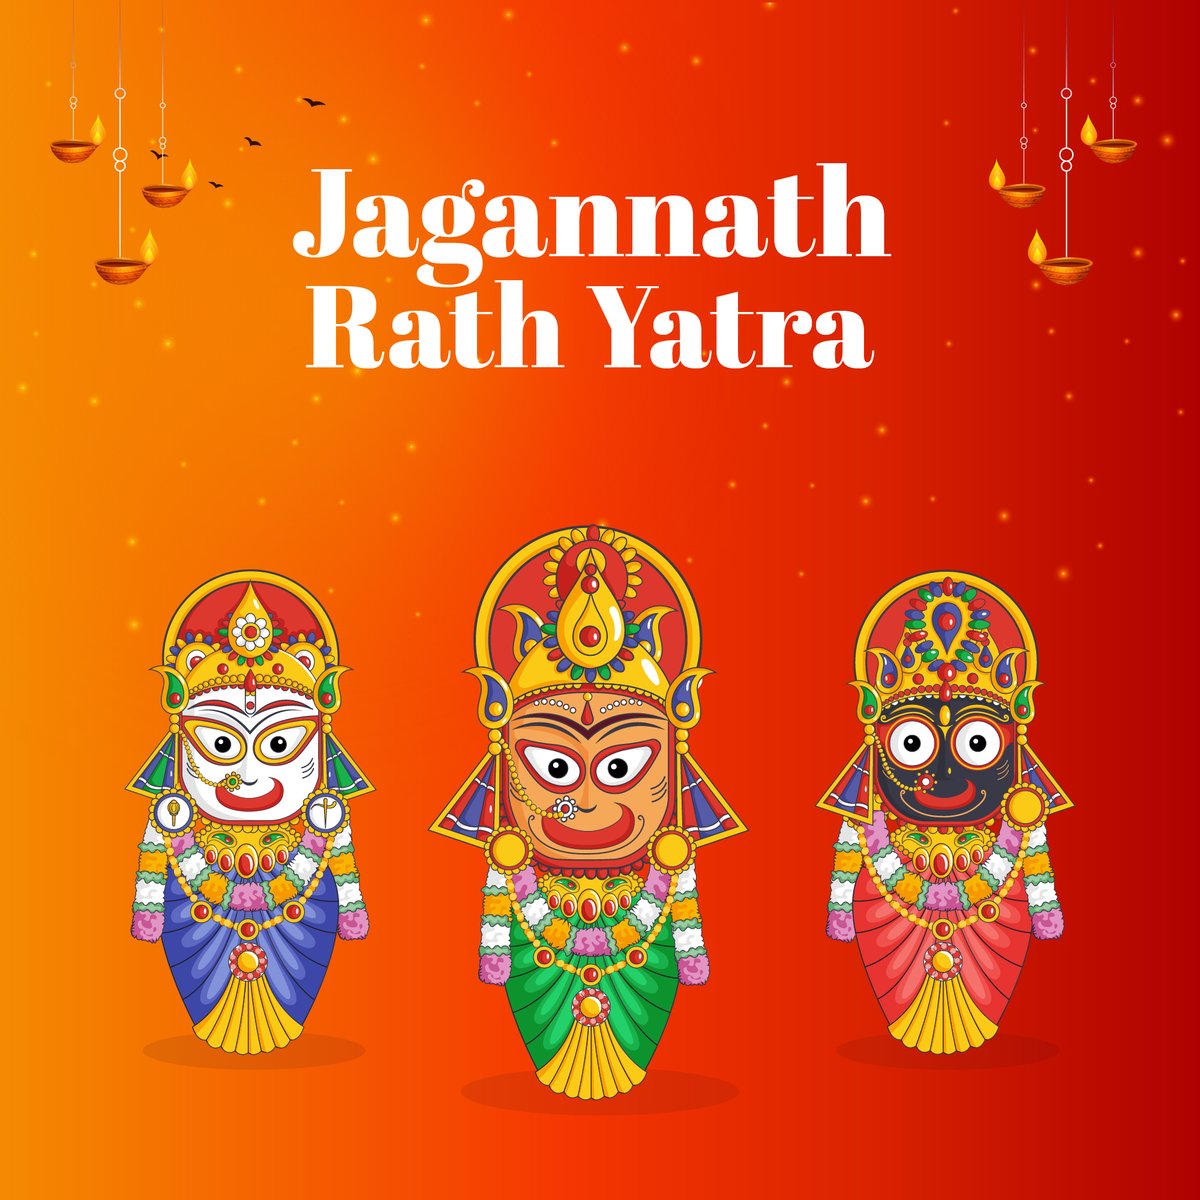 Let us bow to Lord Jagannath to pray for universal peace and happiness.  
#RathYatra banners available on
bit.ly/2REM7vu
#creativehatti #bannersdesign #indiansticker #creativebanner #RathYatrabanner #RathYatra #RathYatrafestival #RathYatracollection #RathYatra2021